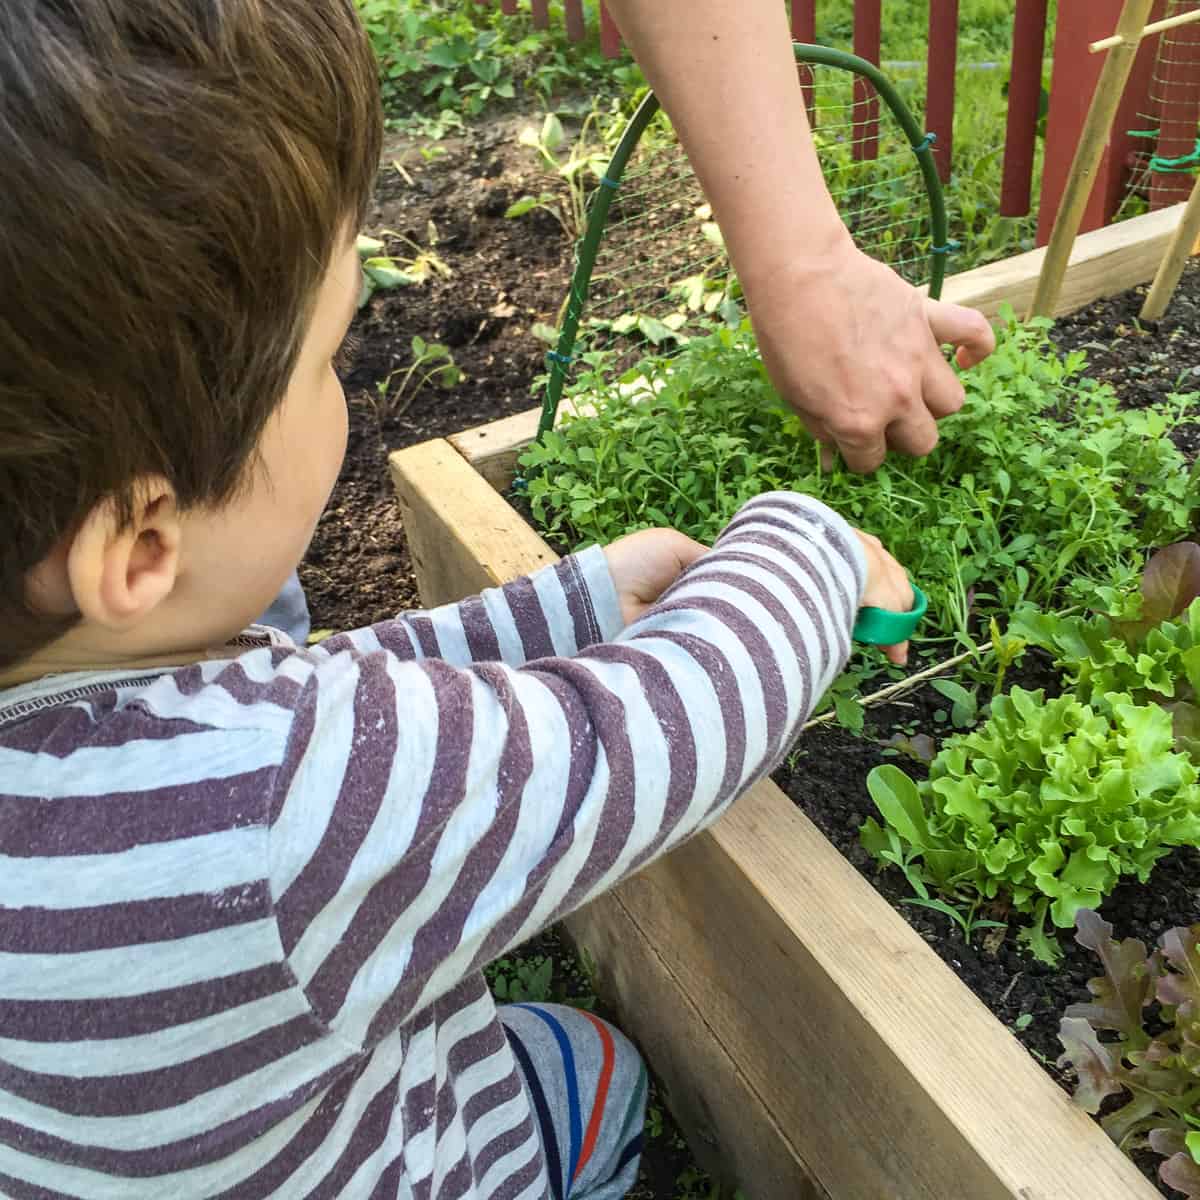 A small child helping to cut cress from a backyard square foot garden.